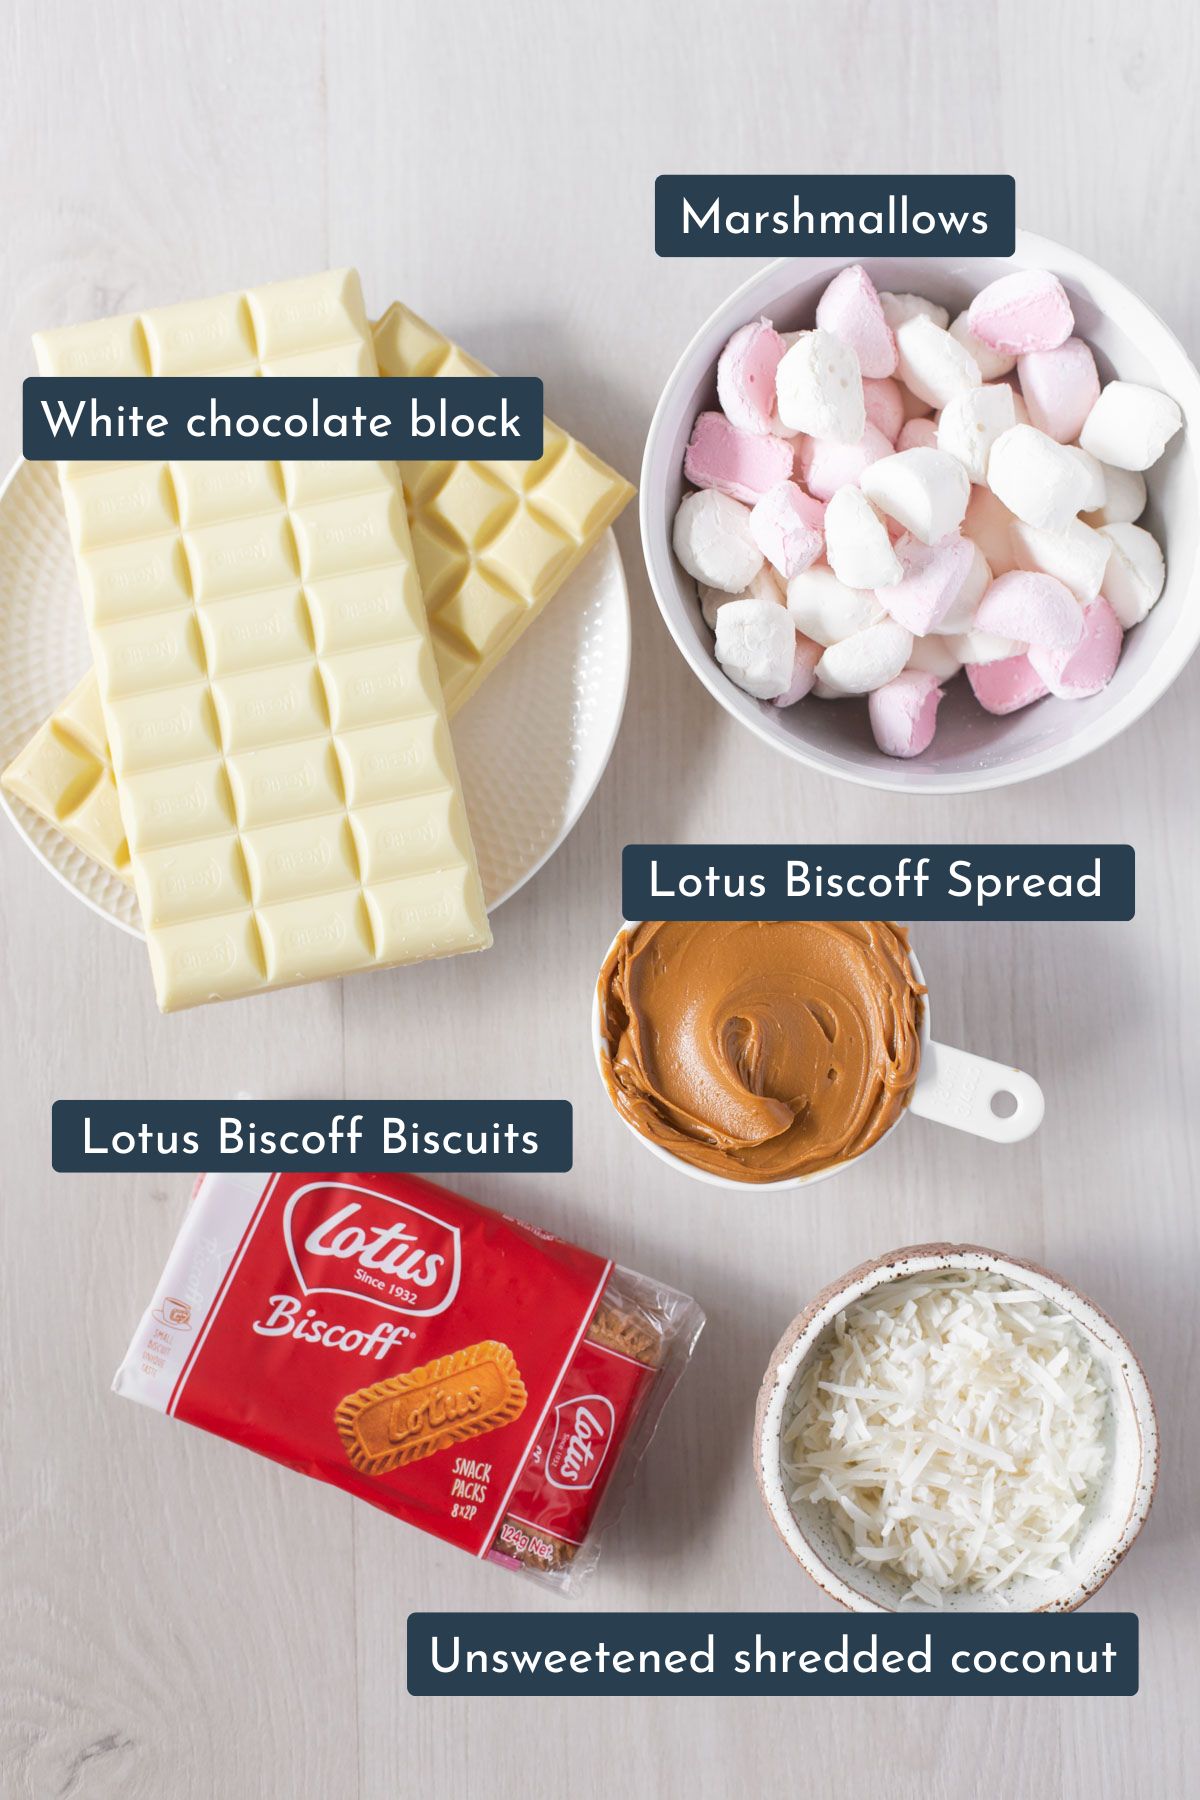 Ingredients to make Biscoff rocky road are Lotus biscoff spread and biscuit, unsweetened shredd coconut, white chocolate block and marshmallows.